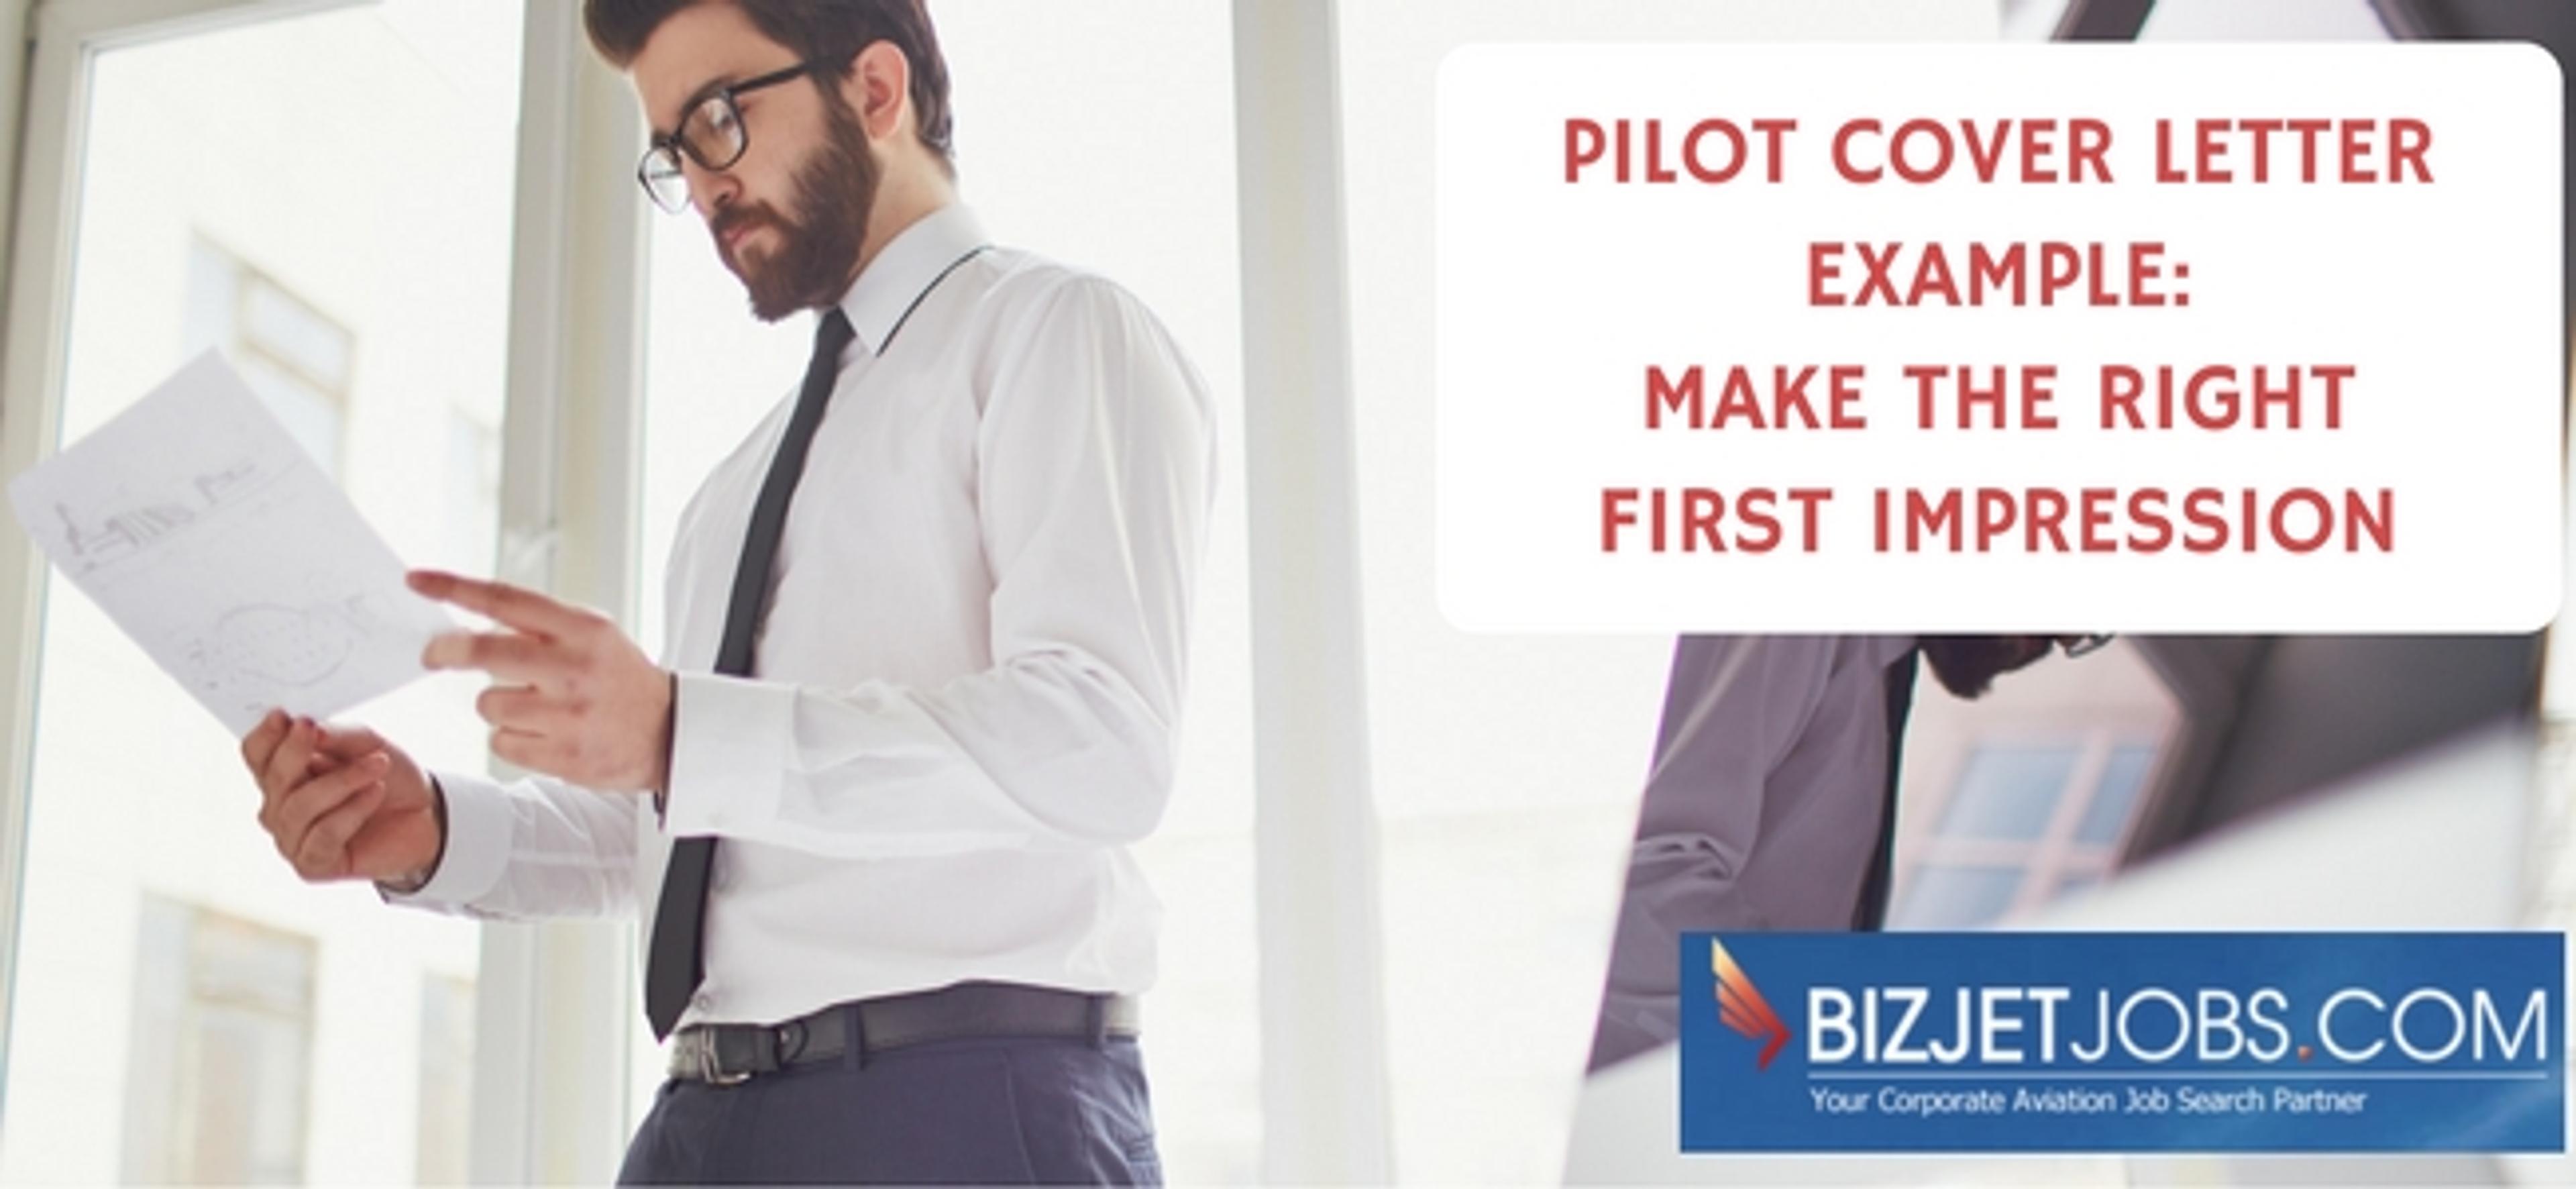 Pilot Cover Letter Example from Aviation HR Expert Angie Marshall: Make the Right First Impression!